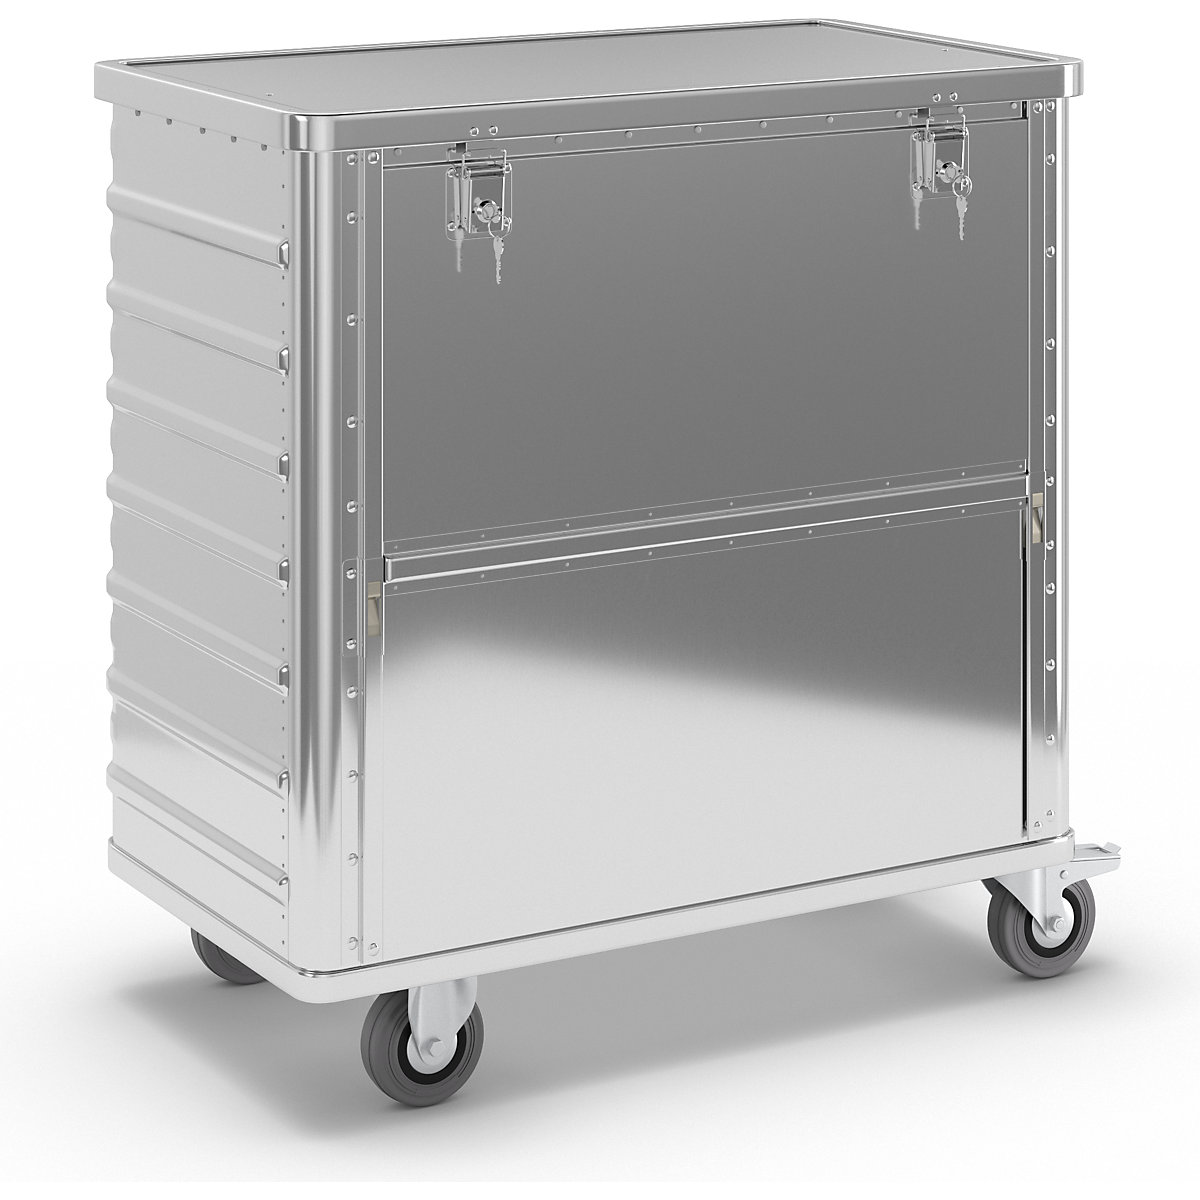 Aluminium container truck, fold down side panel – Gmöhling